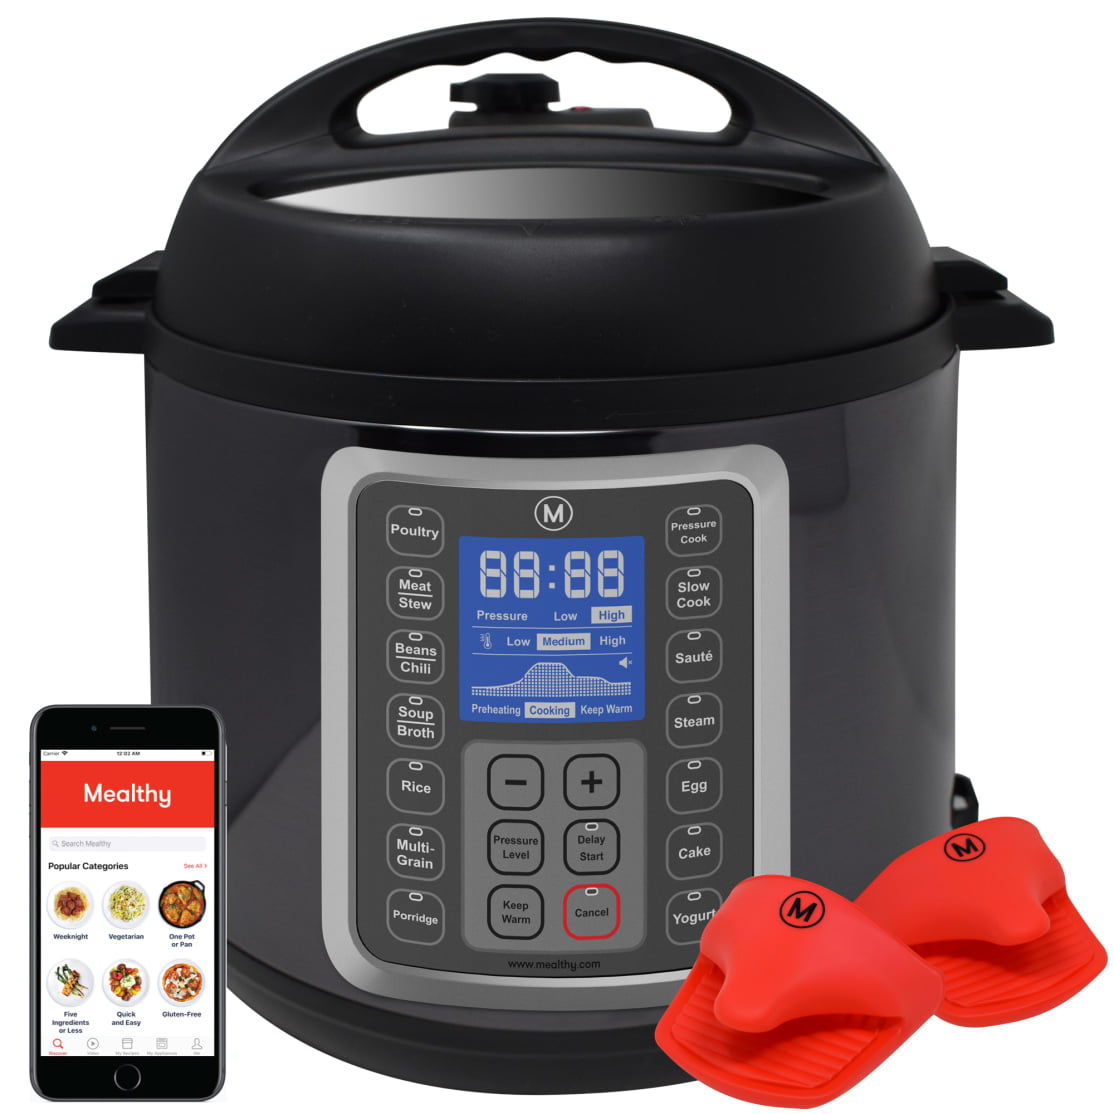 The Mealthy MultiPot 9-in-1 Pressure Cooker, Reviewed